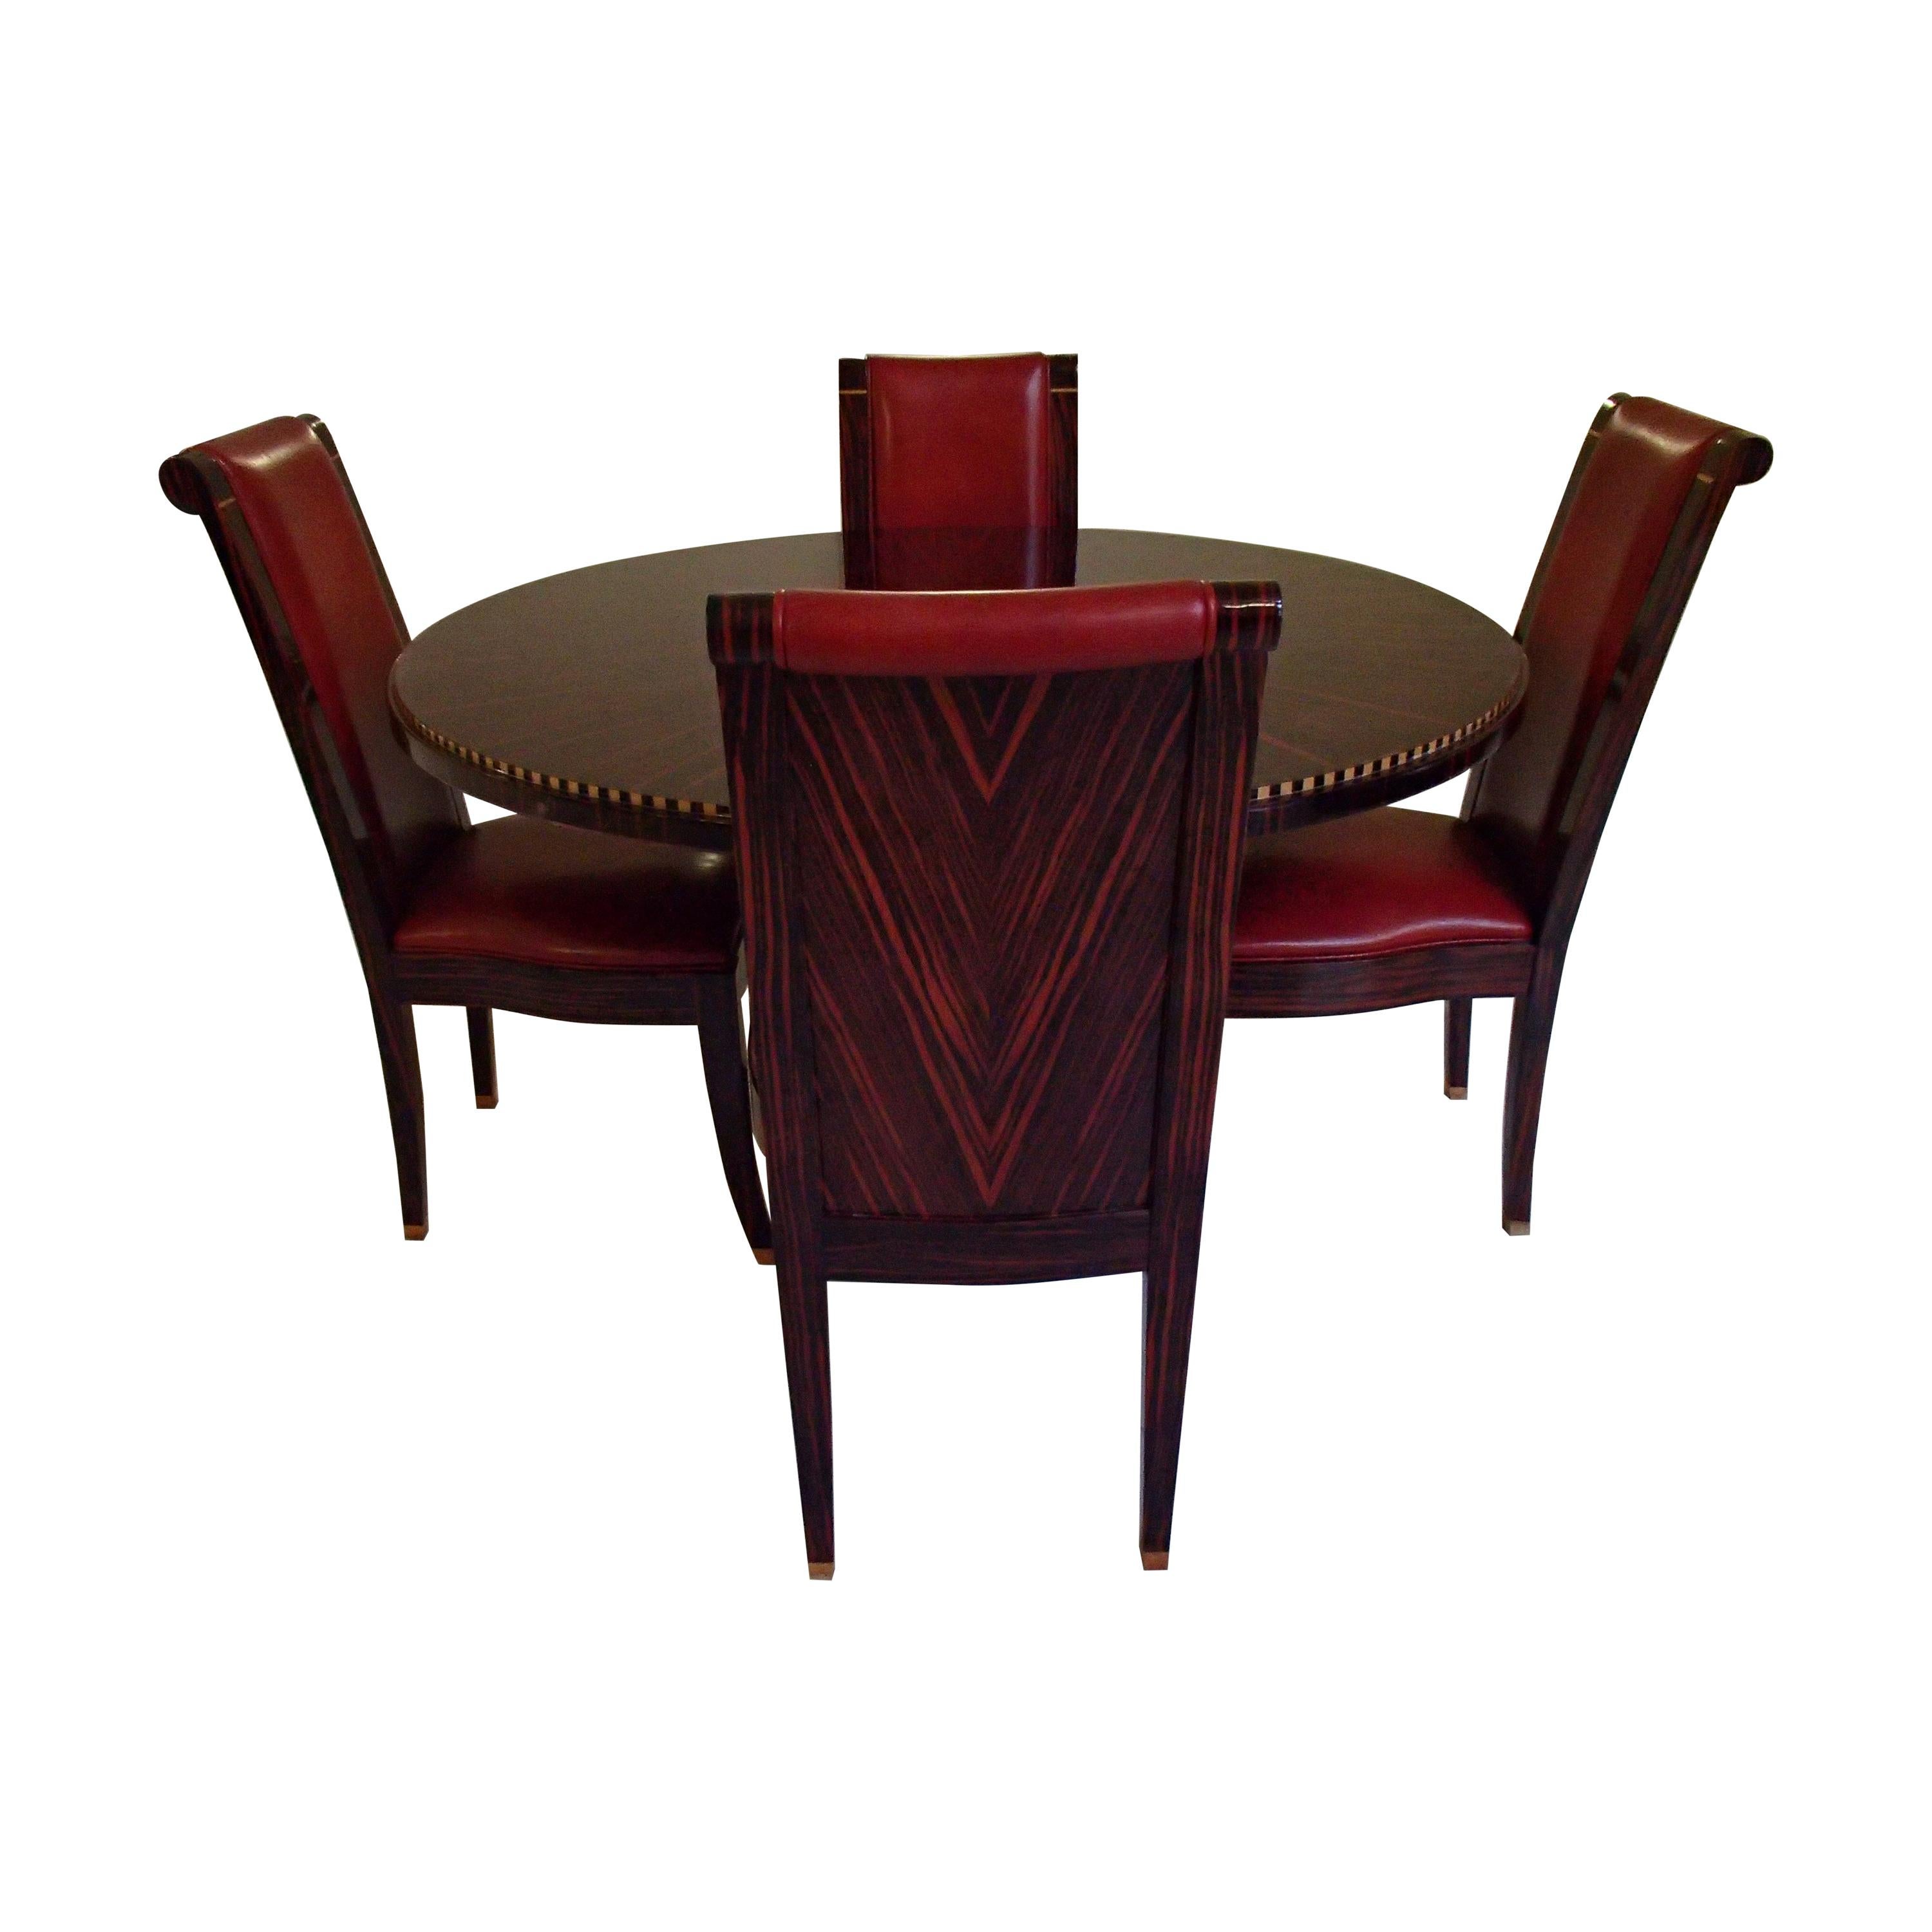 Round Art Deco Table with 4 Red Leather Chairs